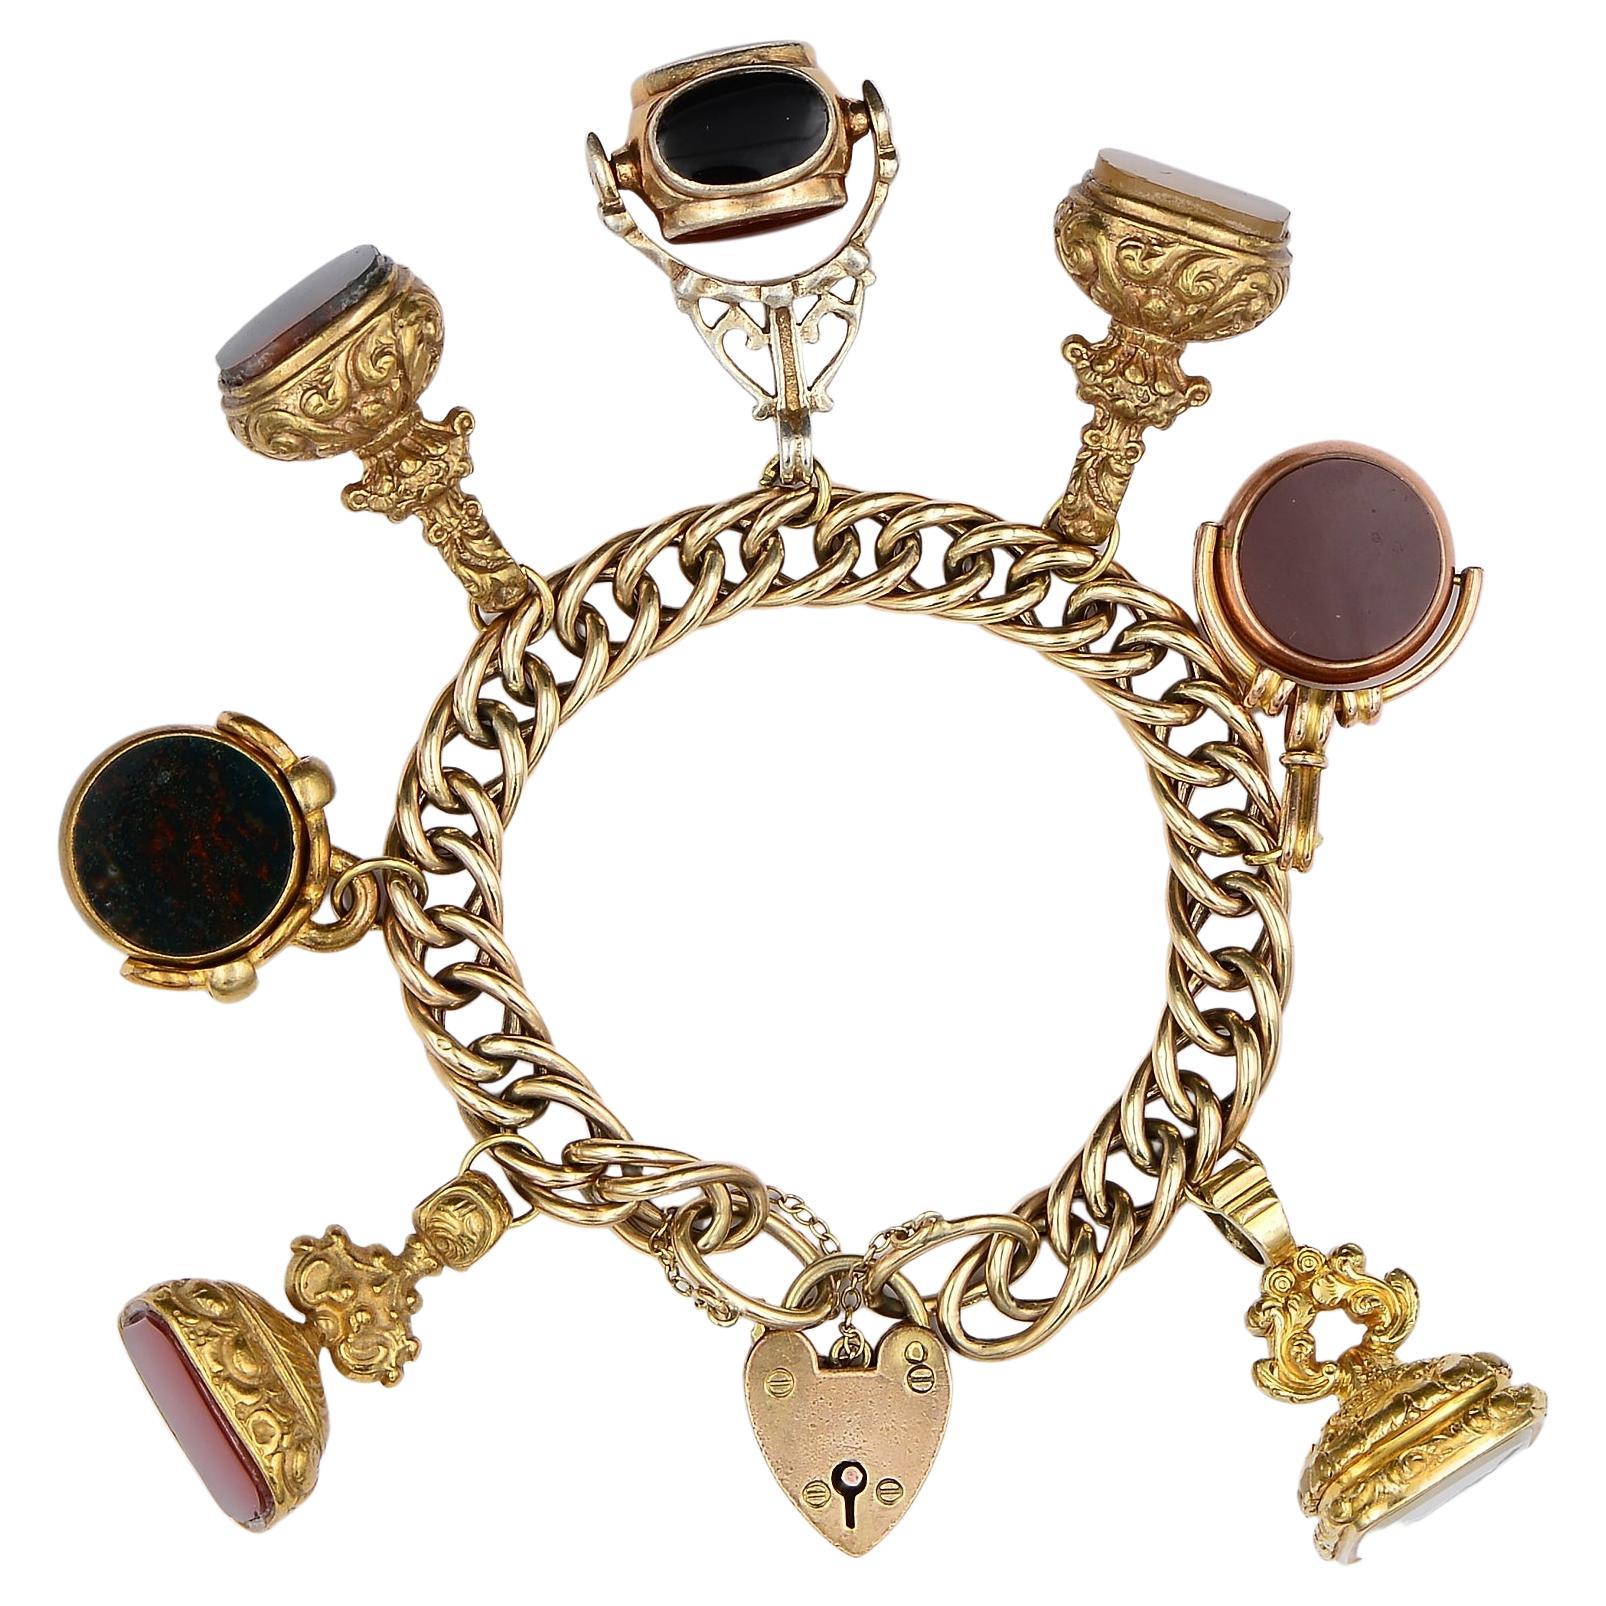 English Charm Bracelet Loaded with Fobs